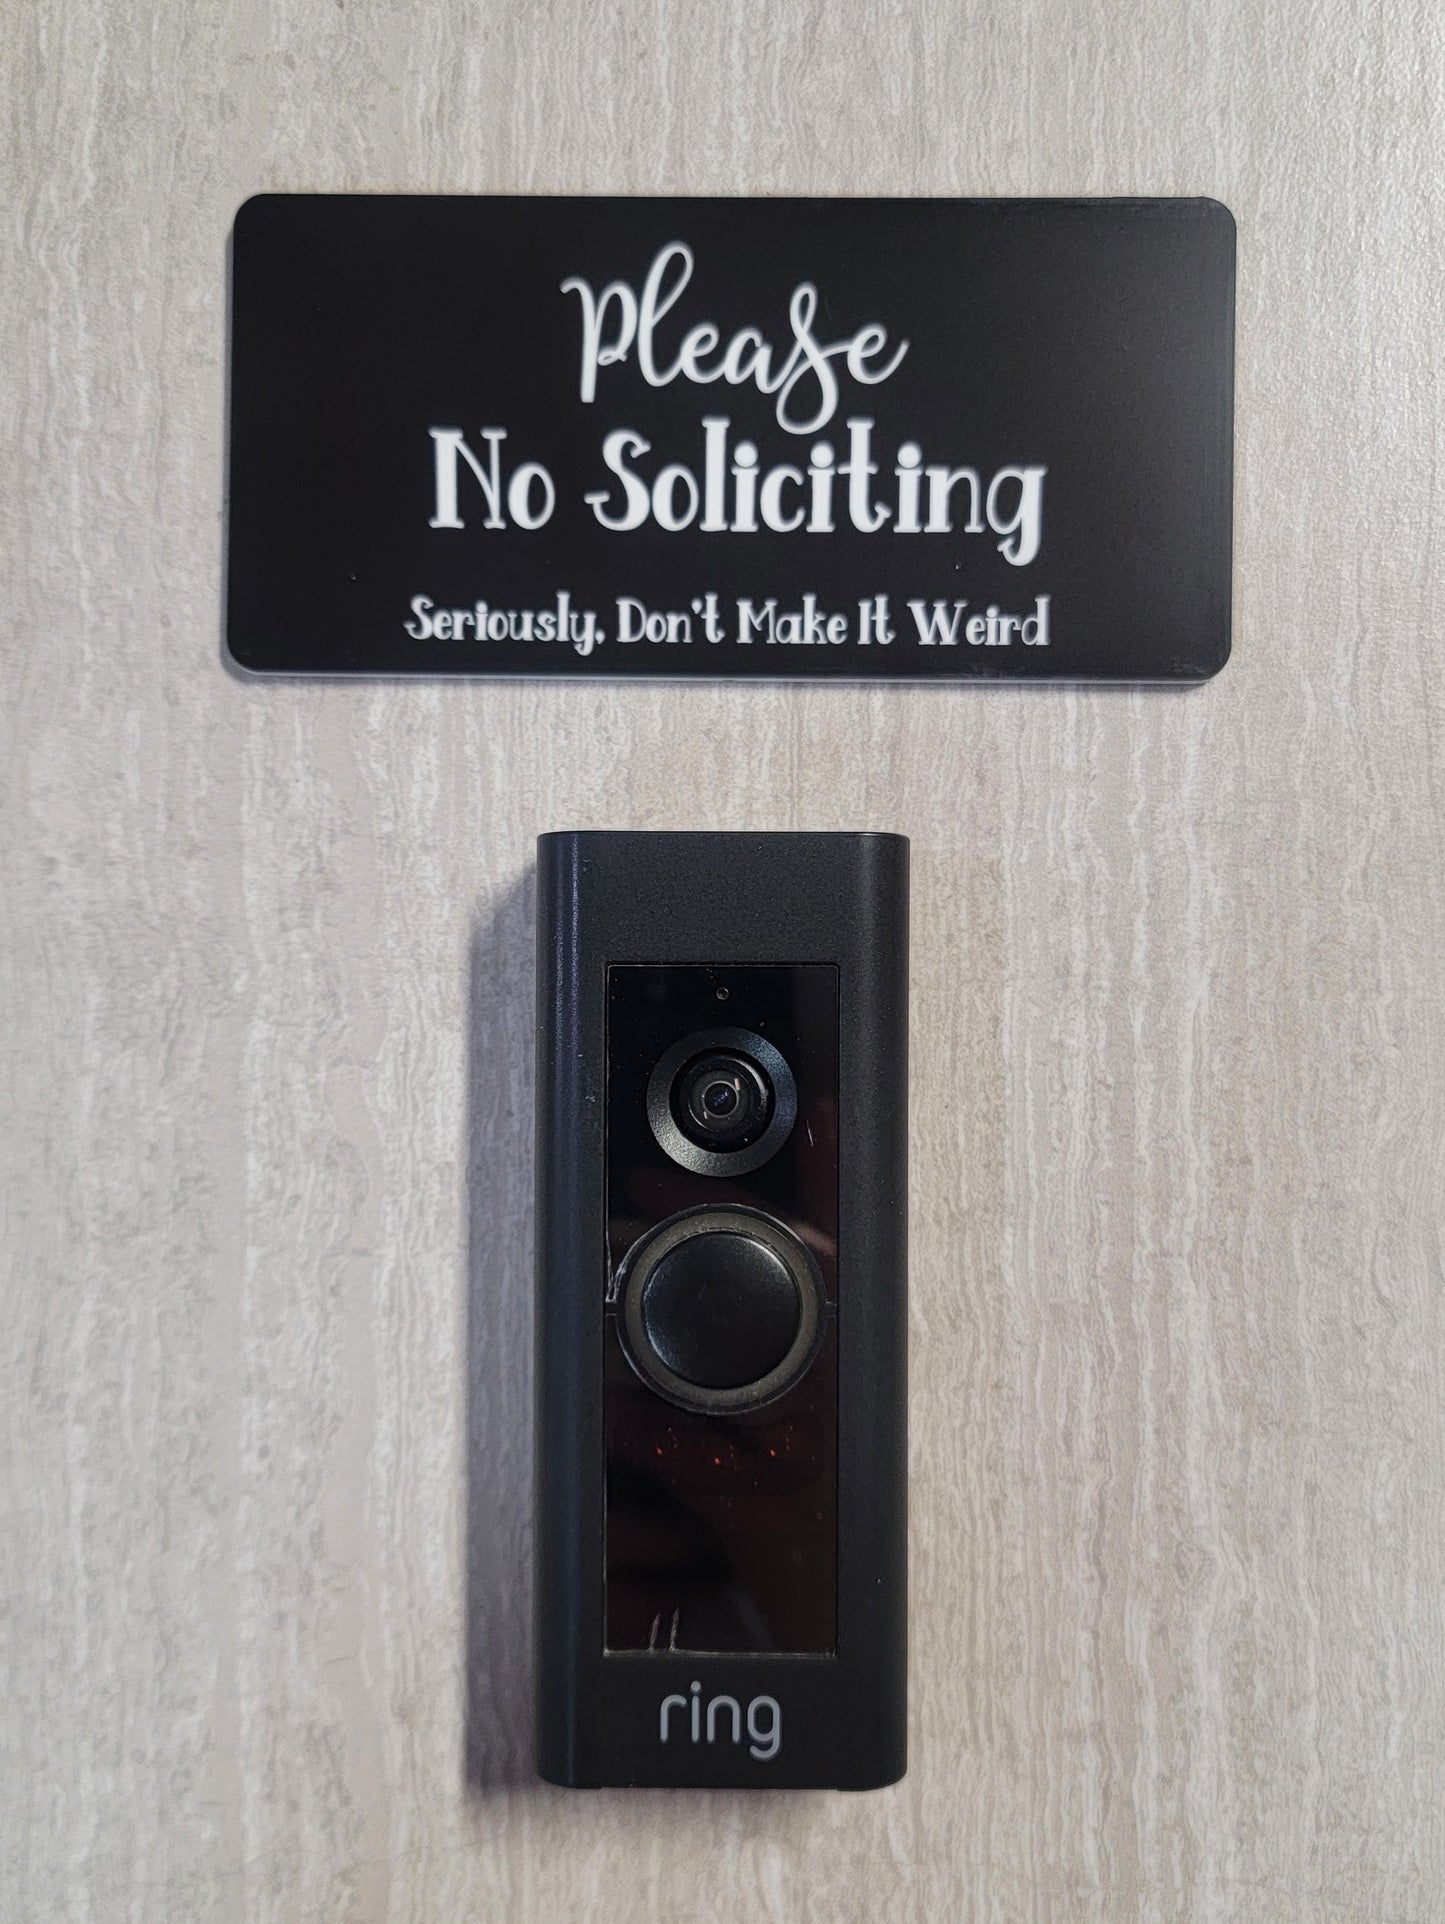 Please No Soliciting Seriously Don't Make It Weird Sign